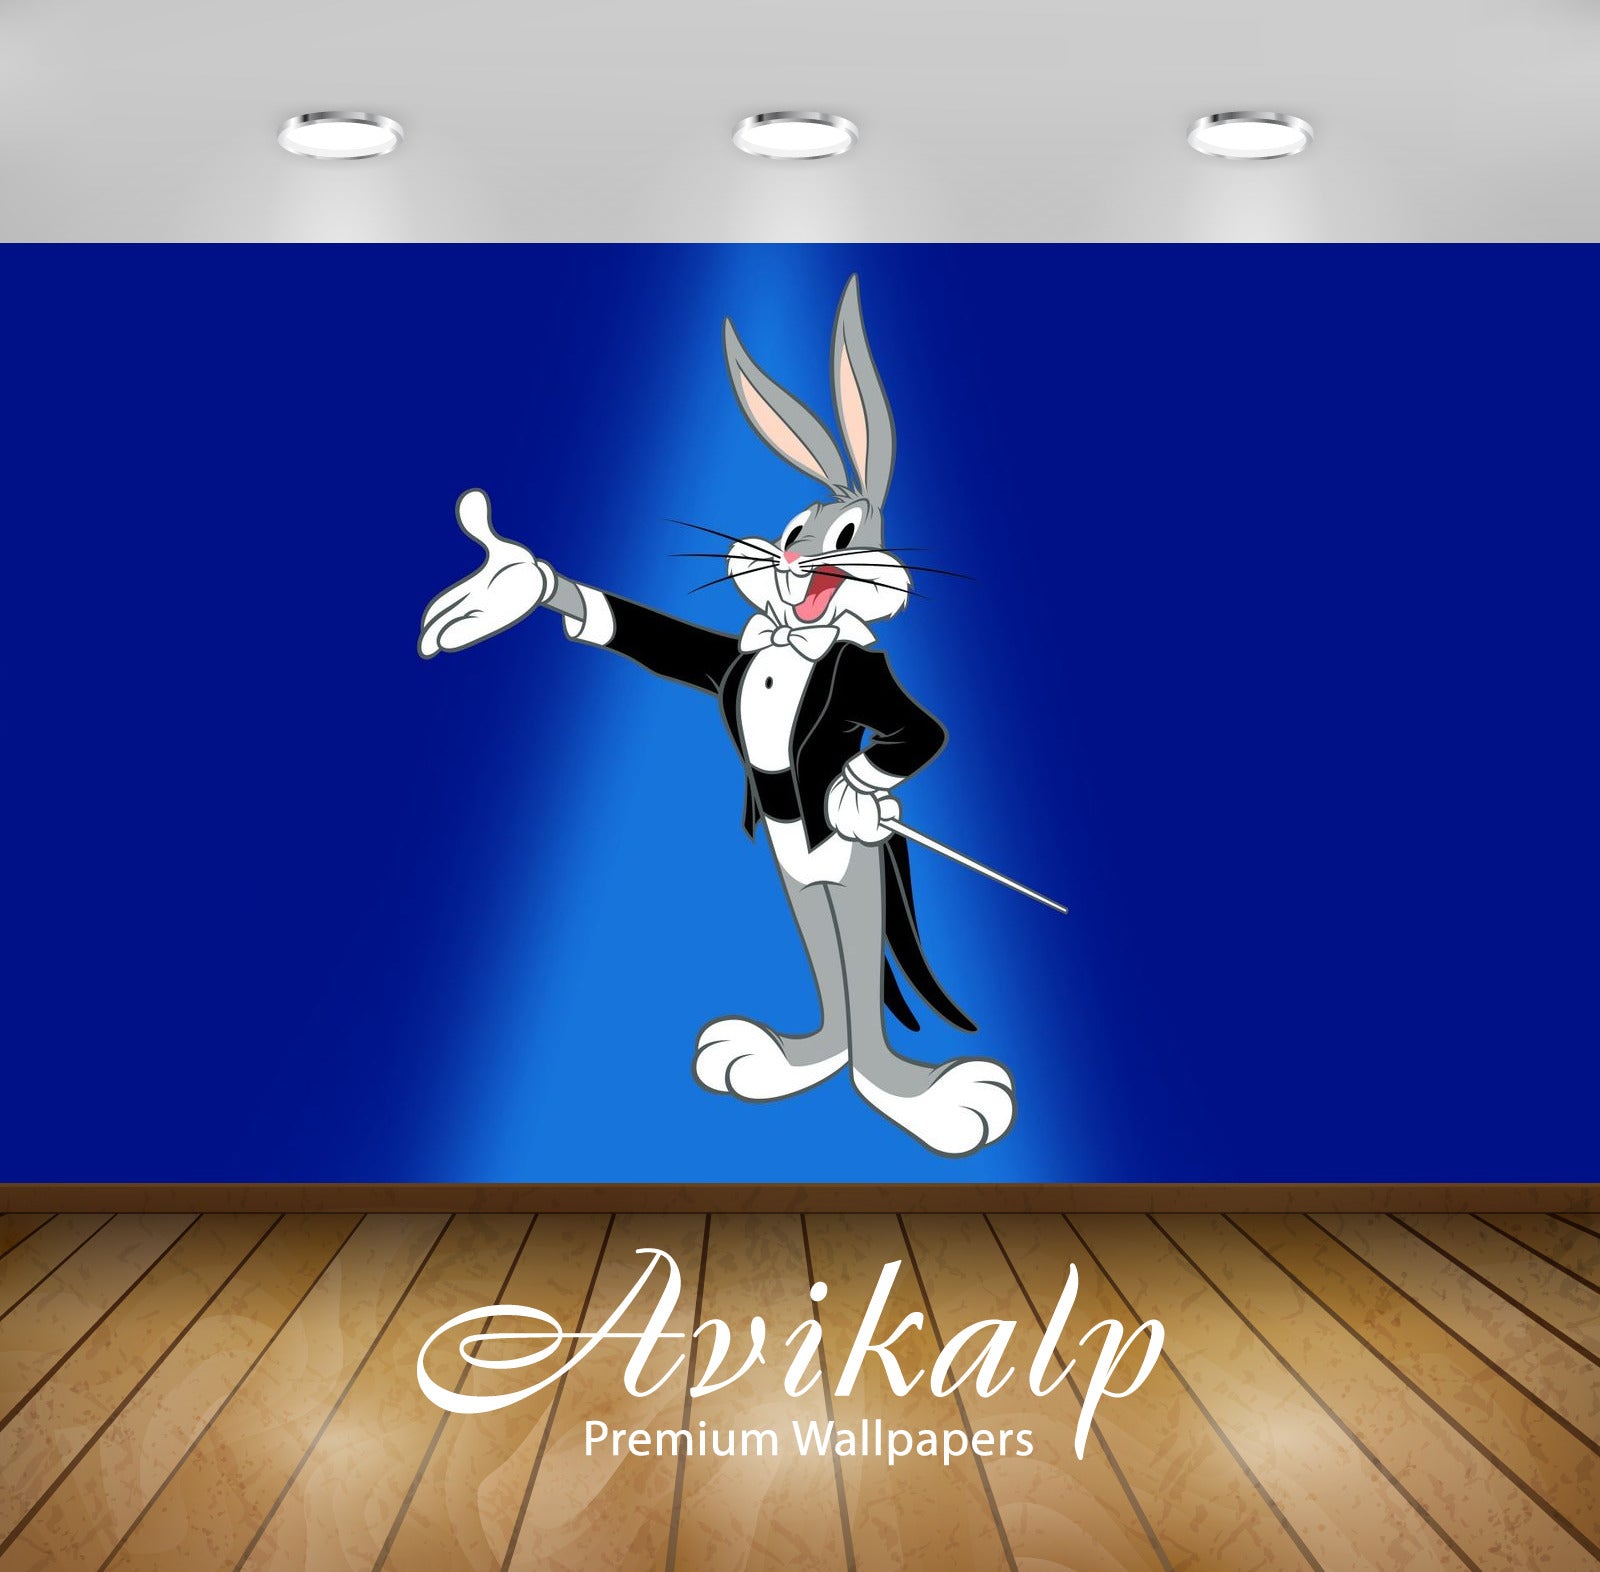 Avikalp Exclusive Awi2201 Bugs Bunny Conductor of the Symphony orchestra Full HD Wallpapers for Livi